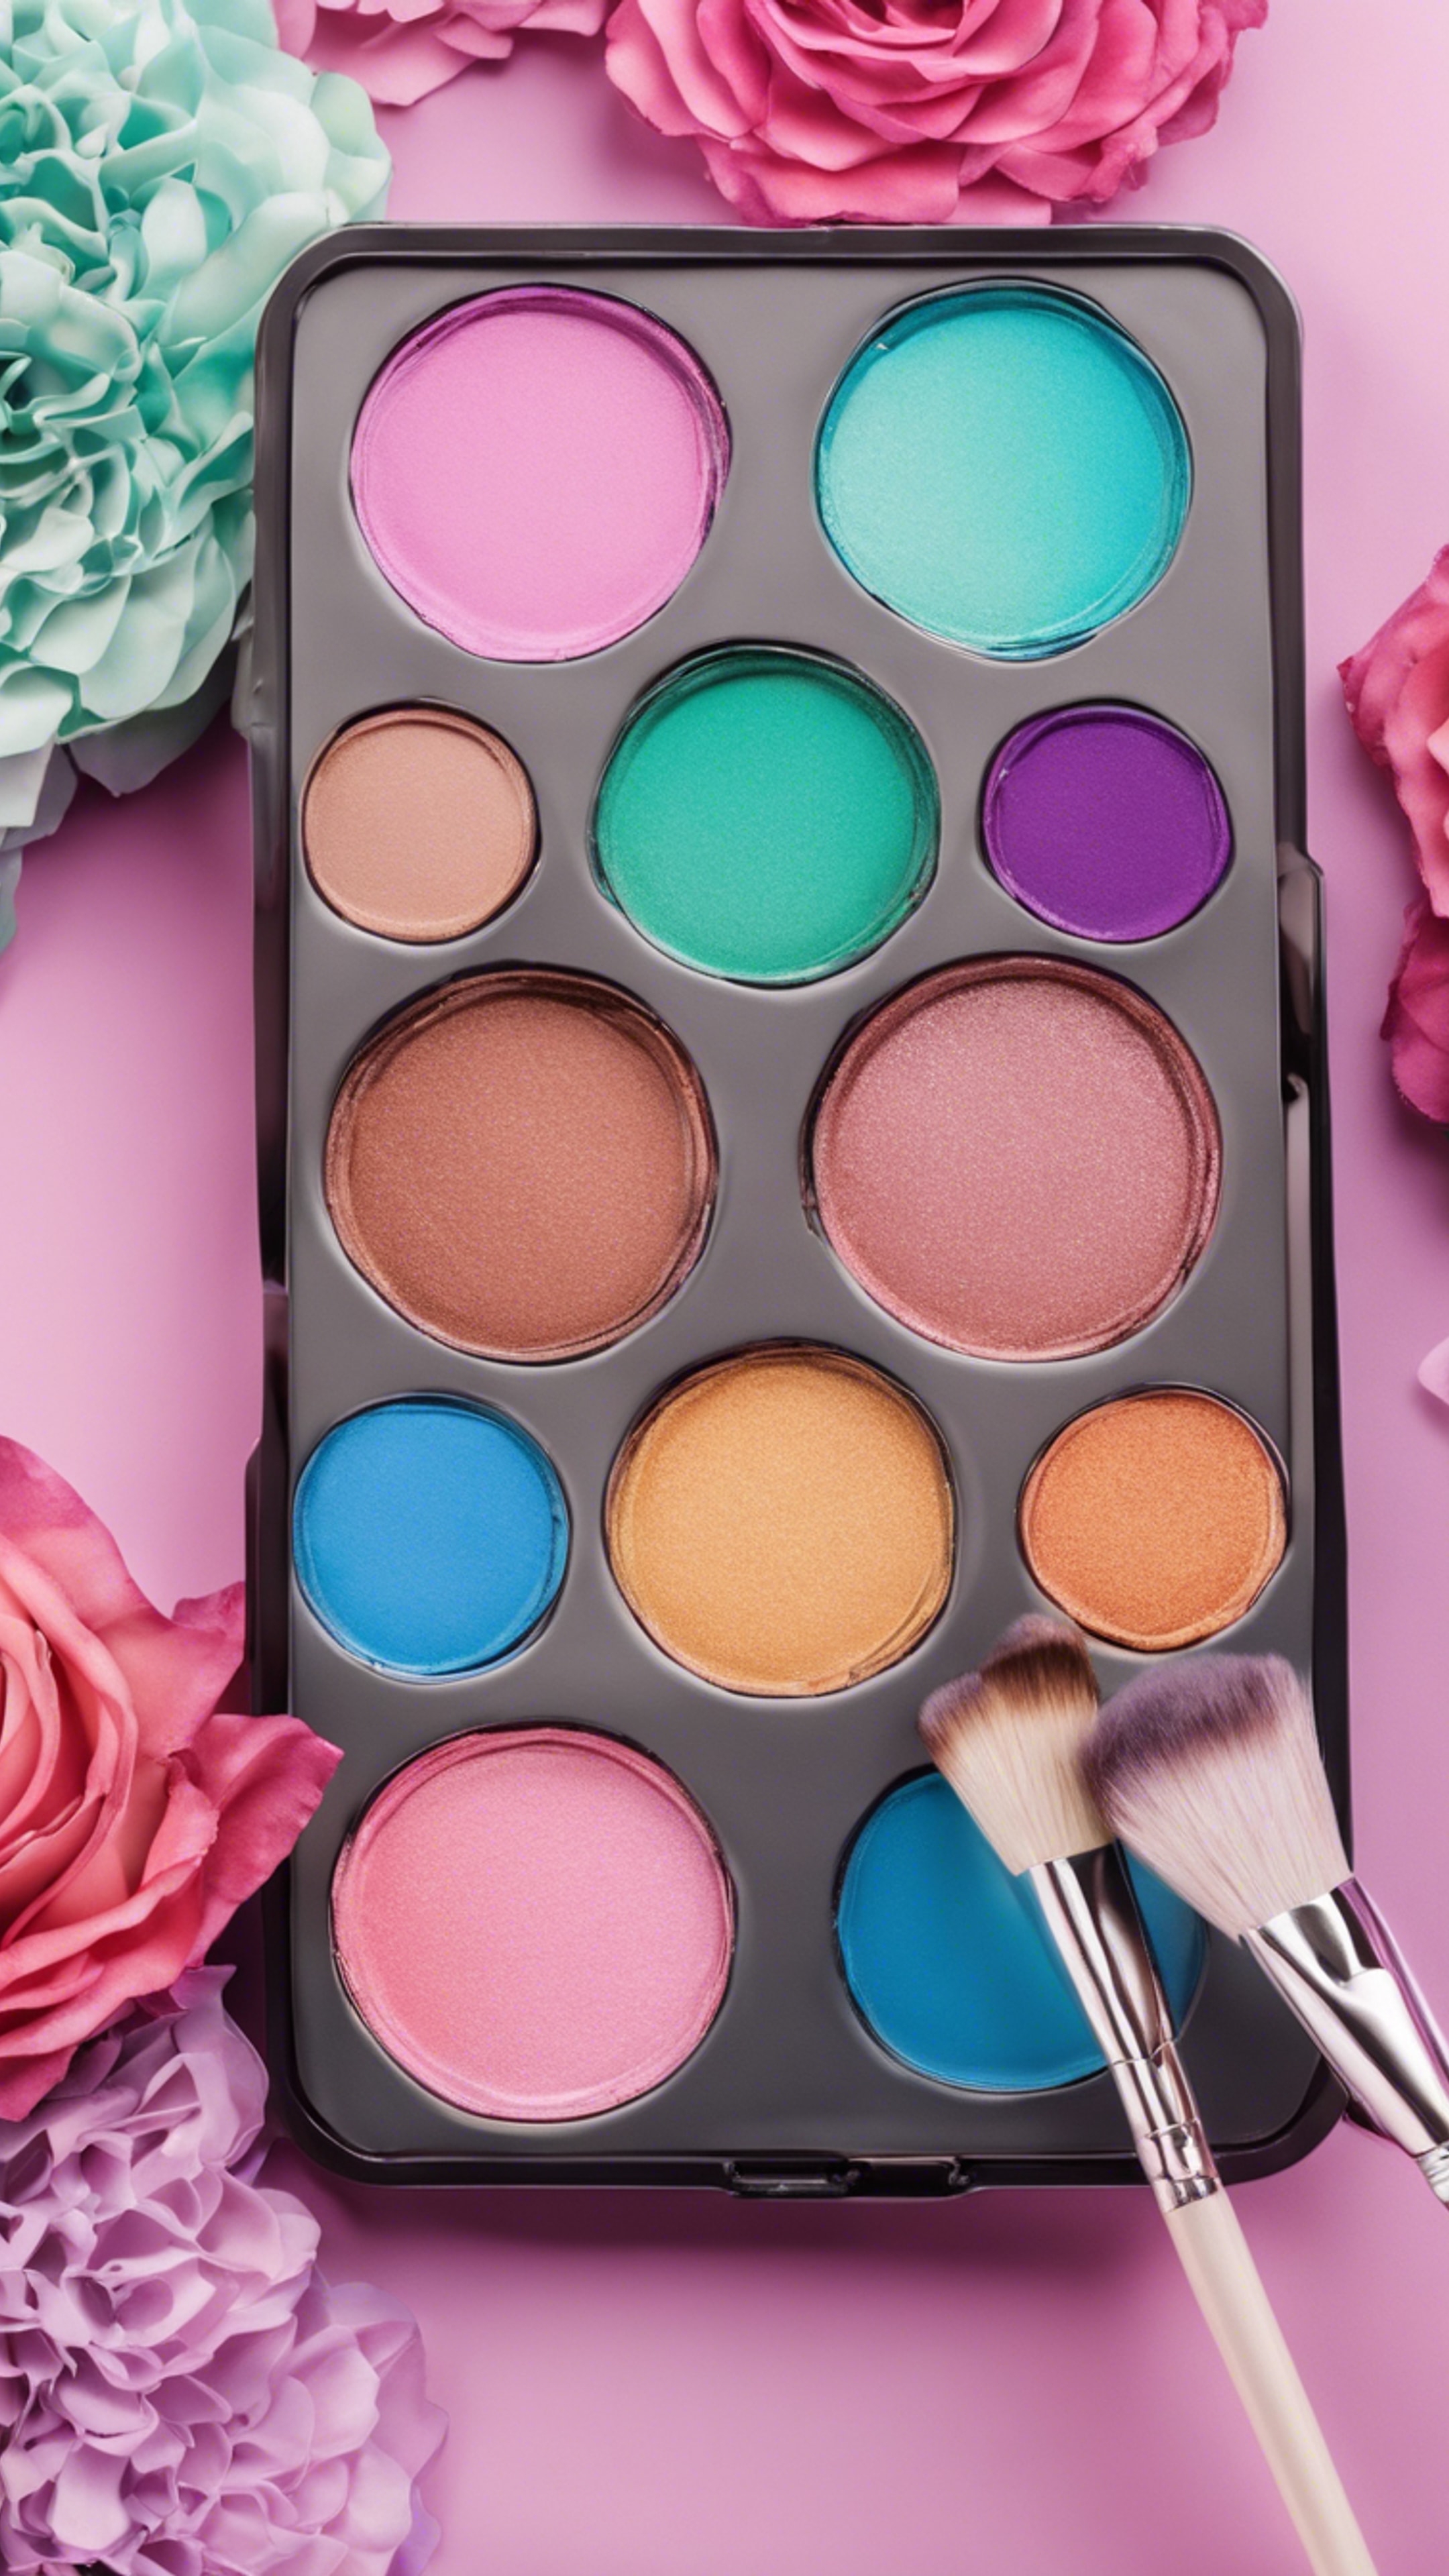 A cute girly makeup palette with a variety of vibrant colors and a brush for application. Hintergrund[6f3ccf3758d549978770]